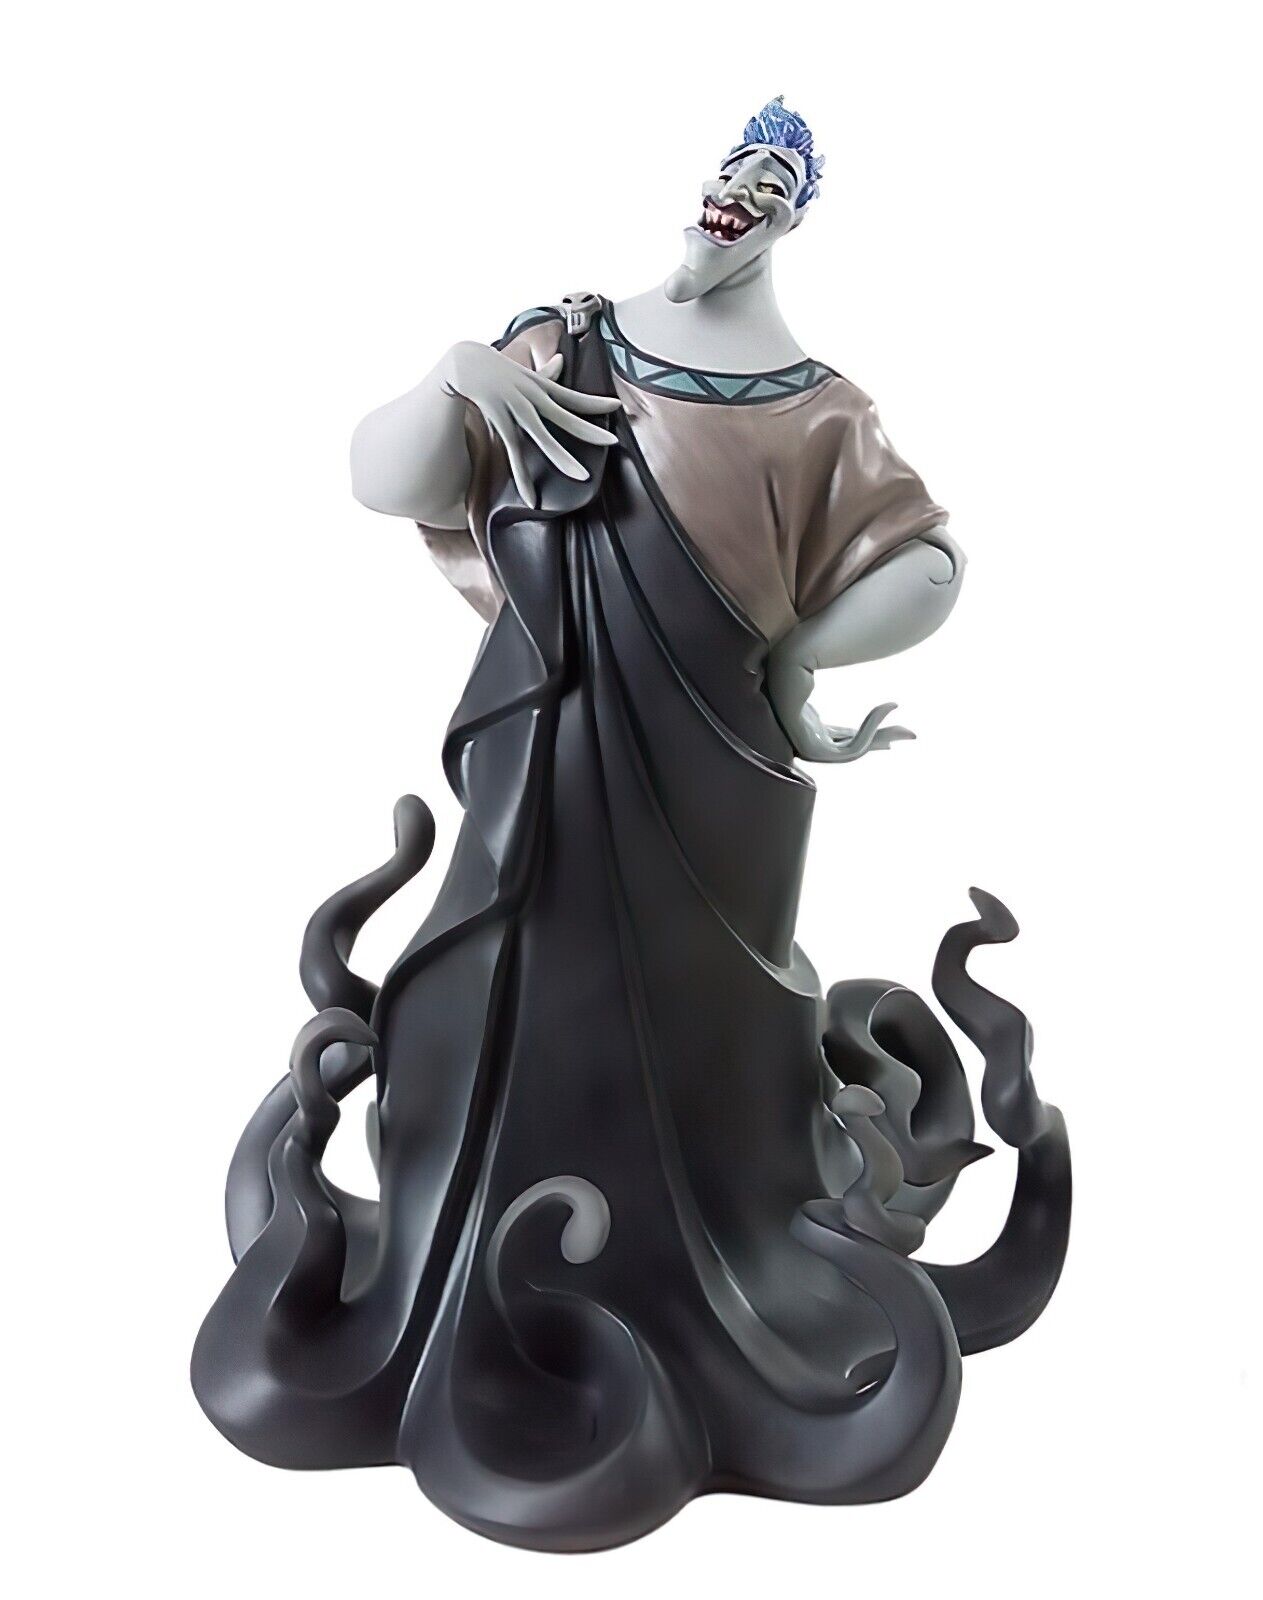 Enesco WDCC Hercules Names Hades, Lord of the Dead NEW&RARE 4006677